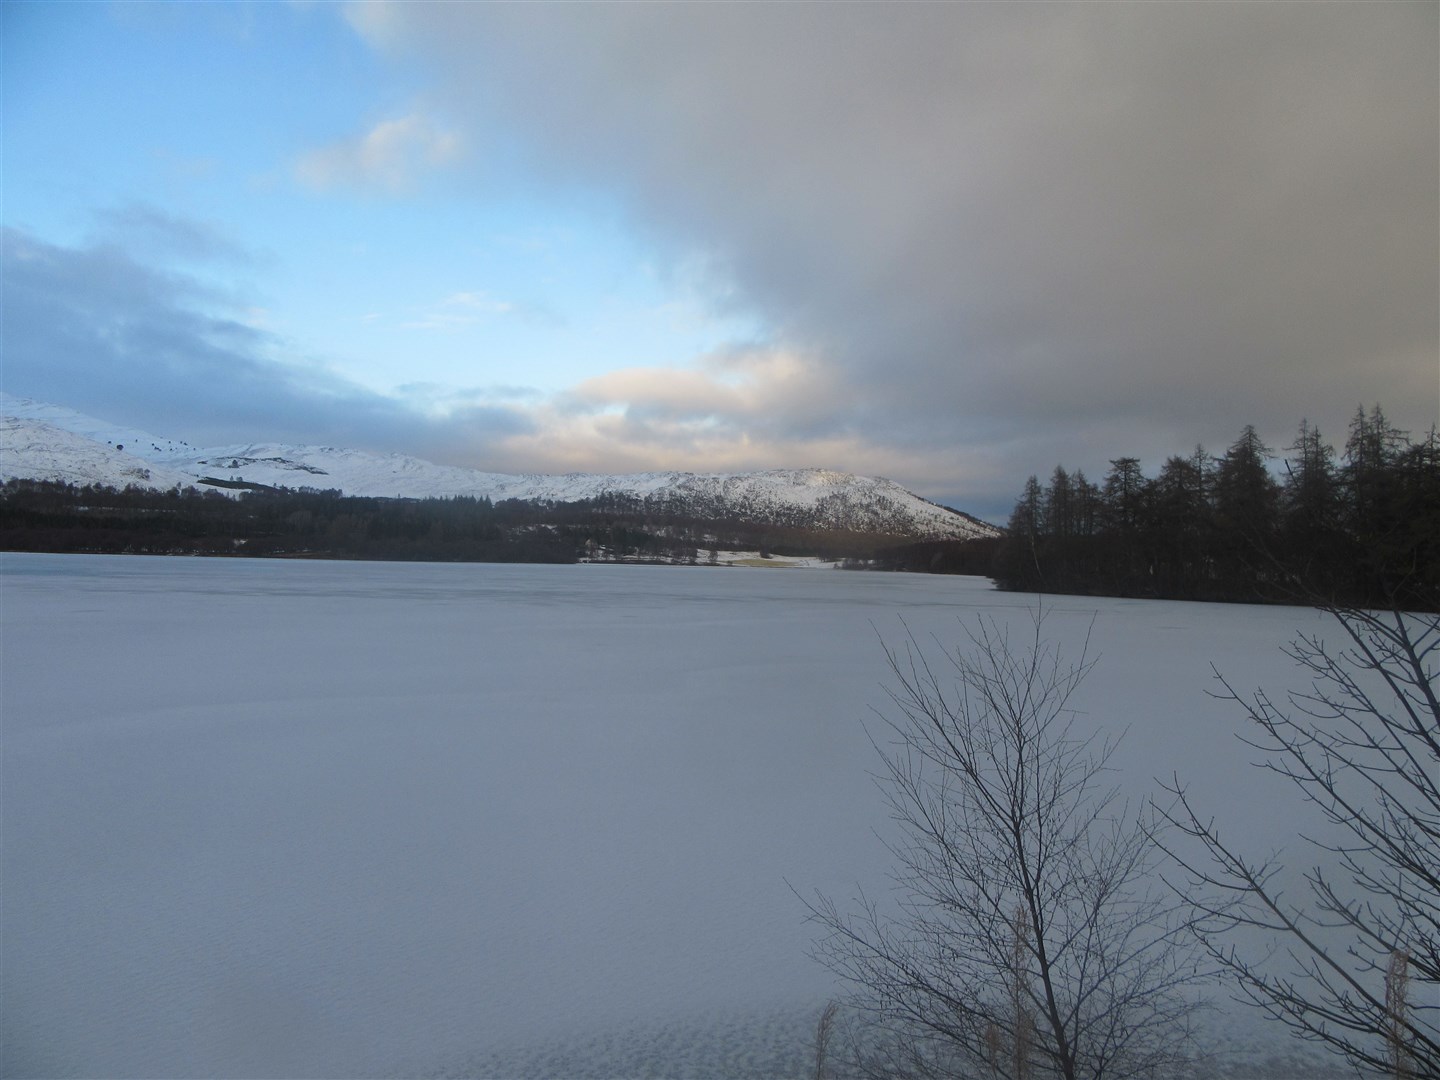 Loch Alvie has resembled a frozen field for several days since the temperatures plummeted to below zero